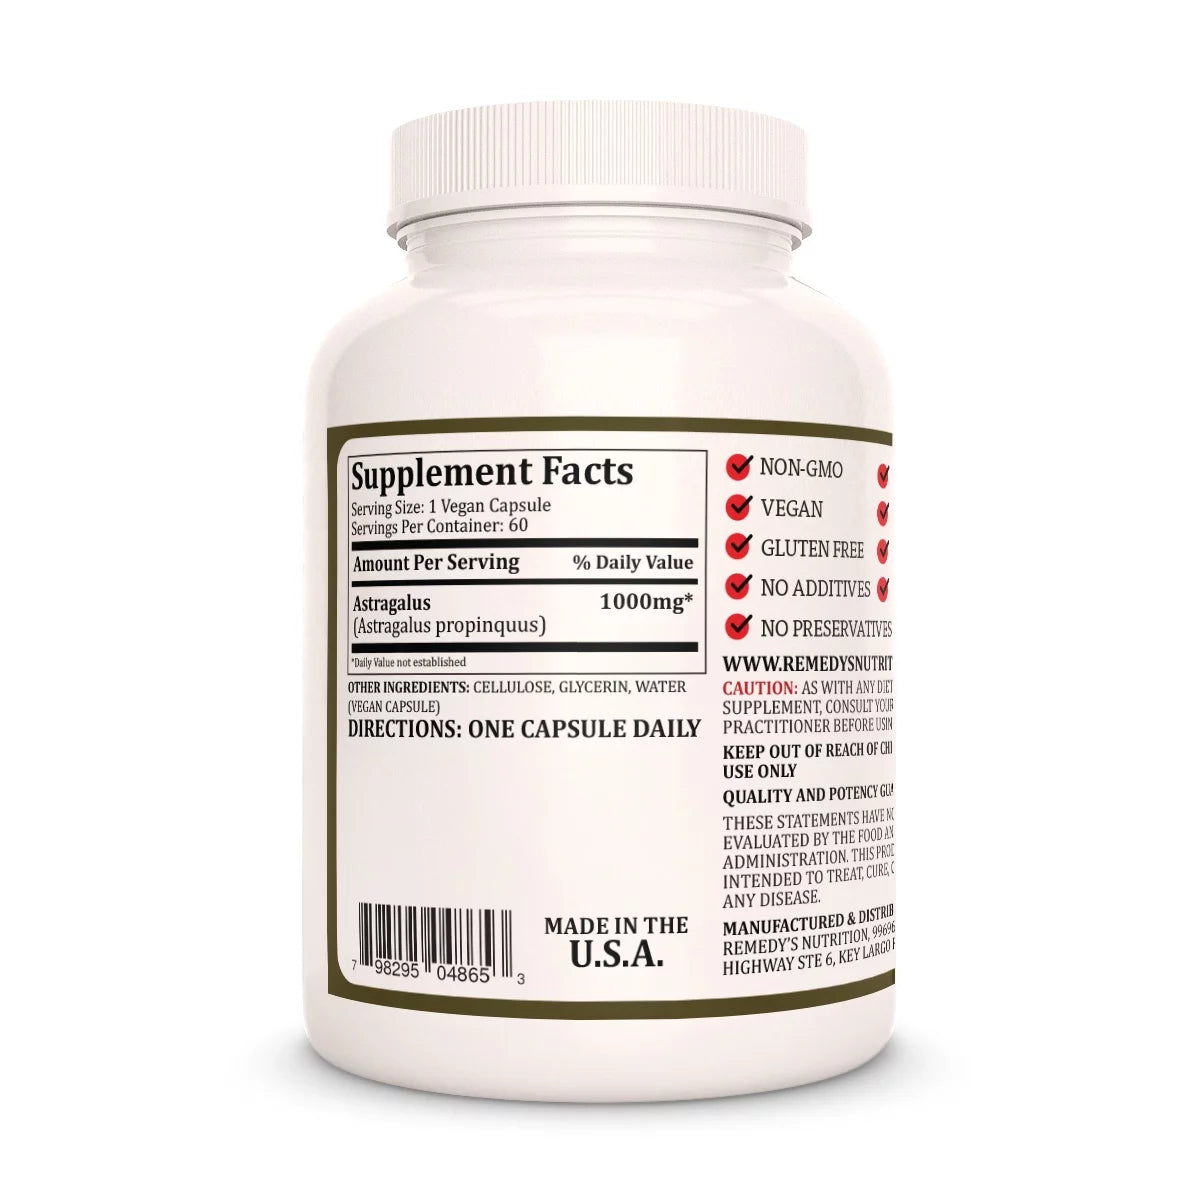 Image of Remedy's Nutrition® Astragalus back bottle label. Supplement Facts, Ingredients and Directions. propinquus.